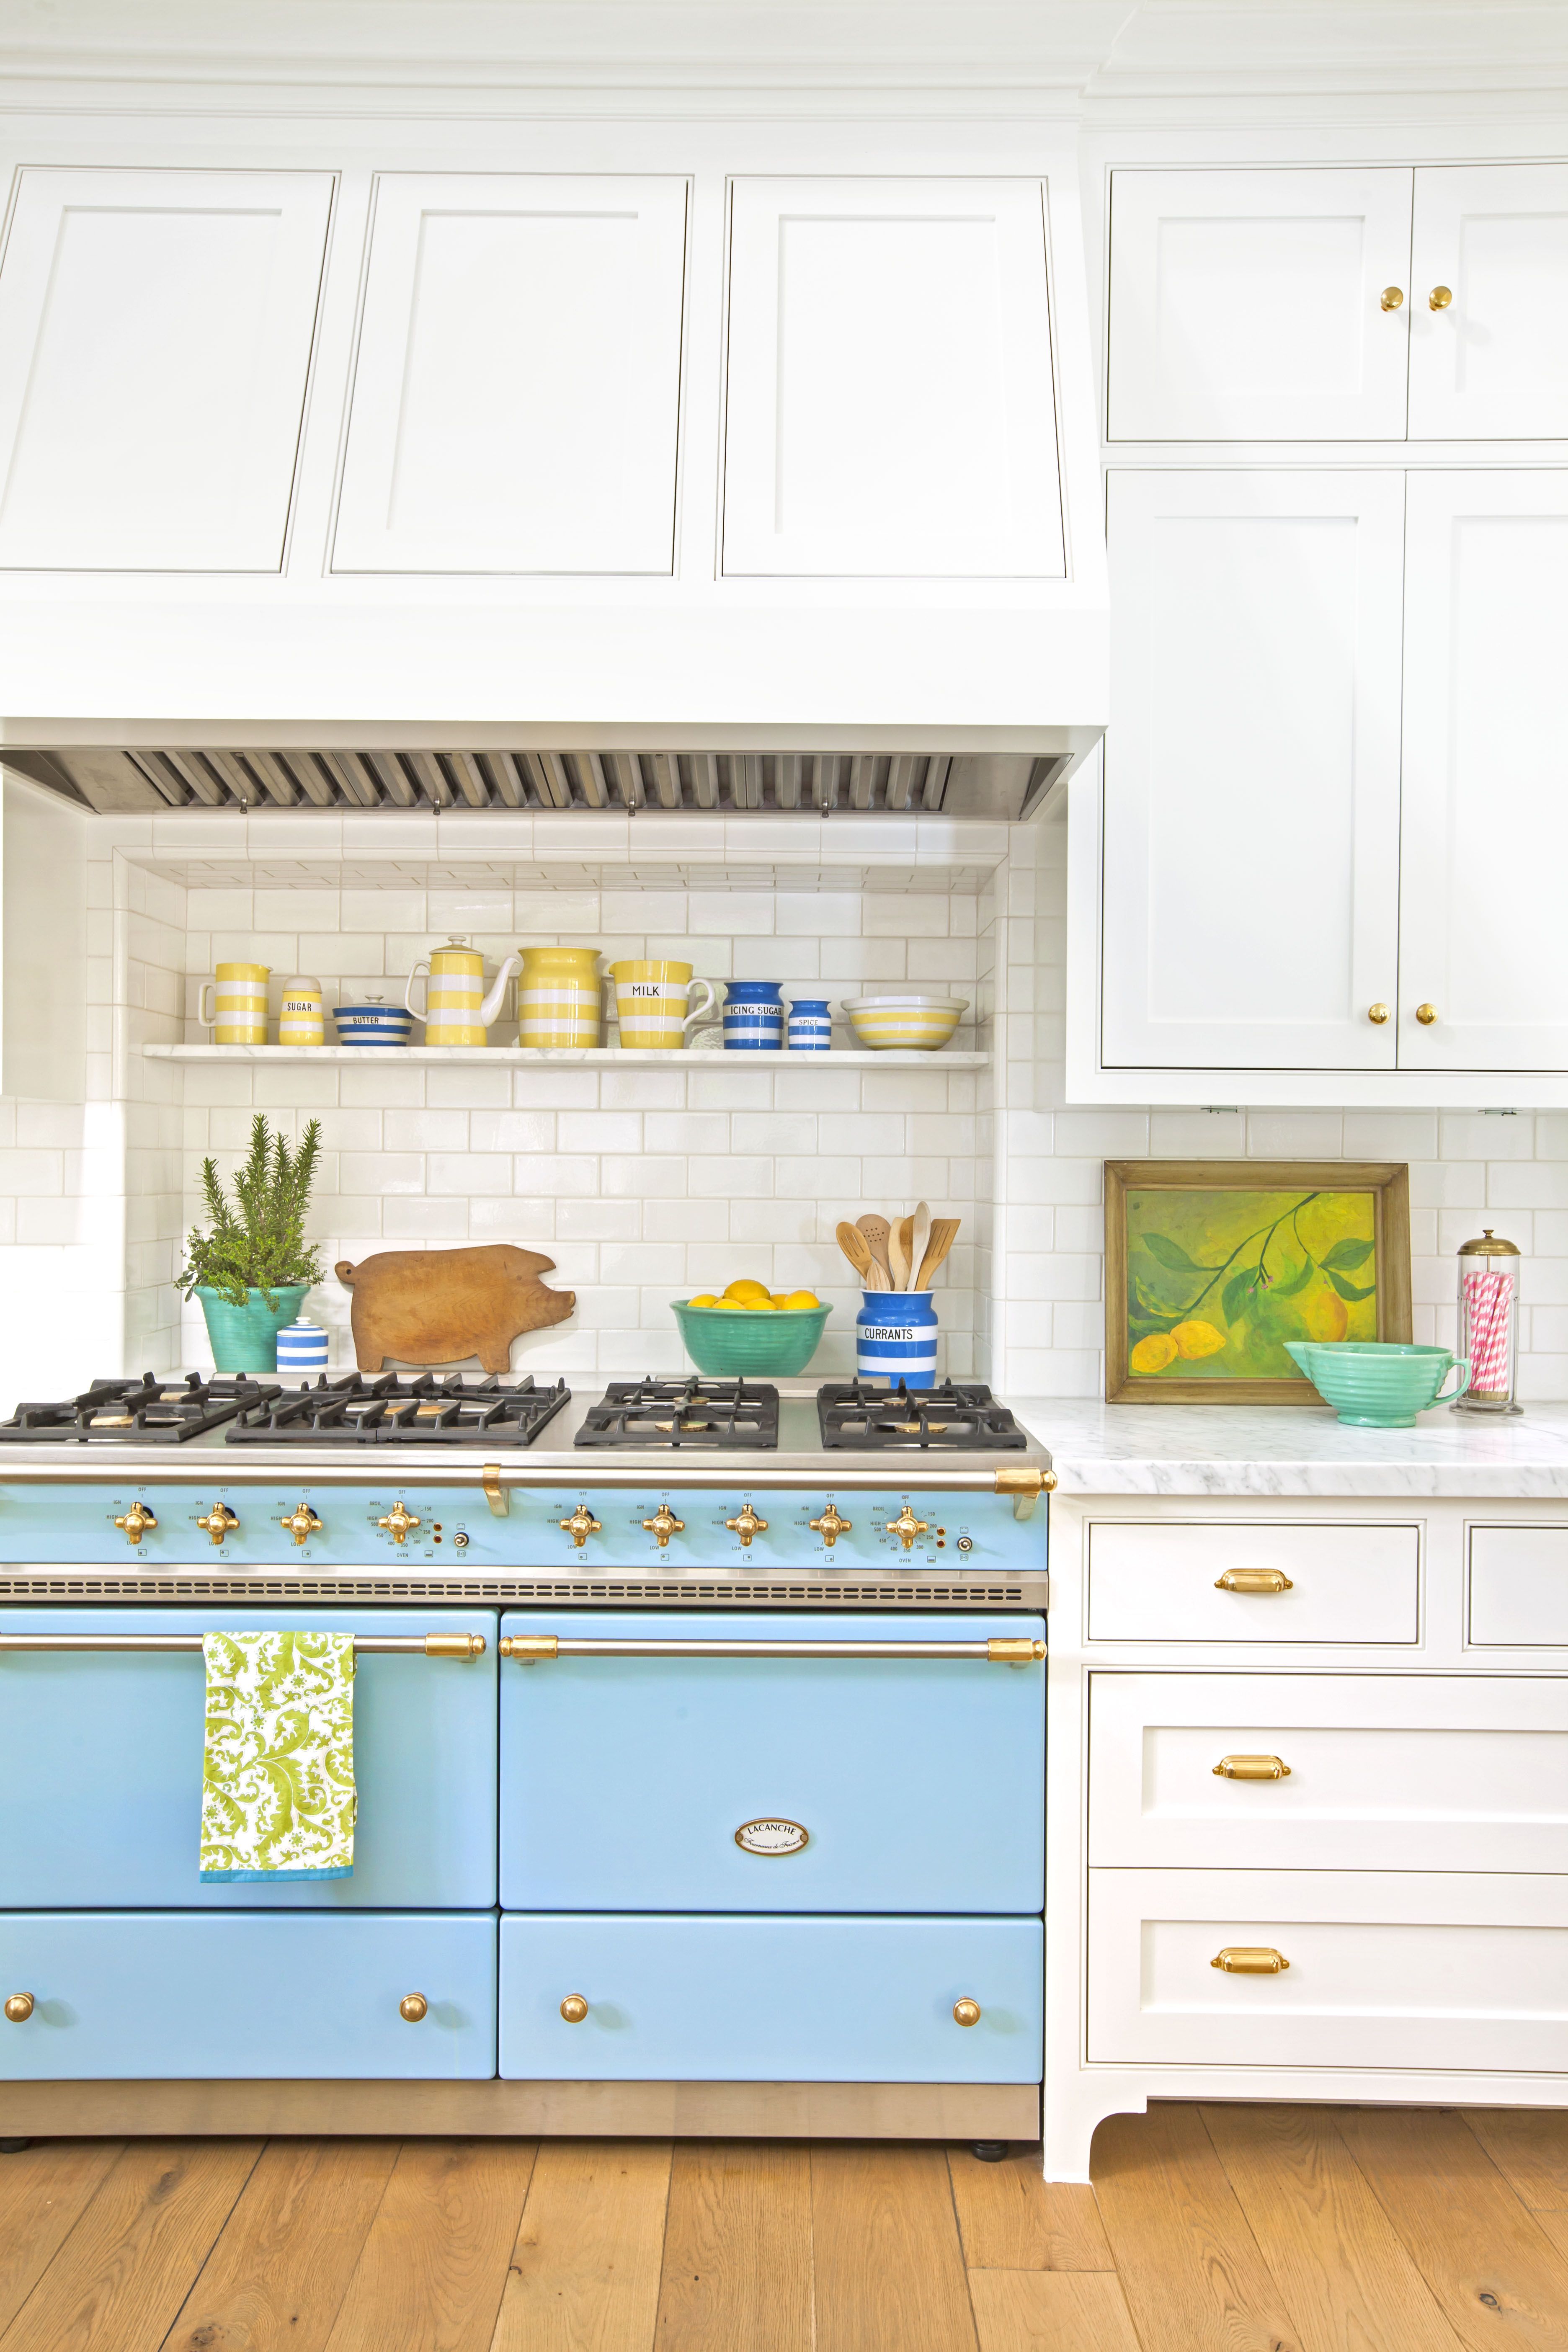 32 kitchen trends 2020 - new cabinet and color design ideas